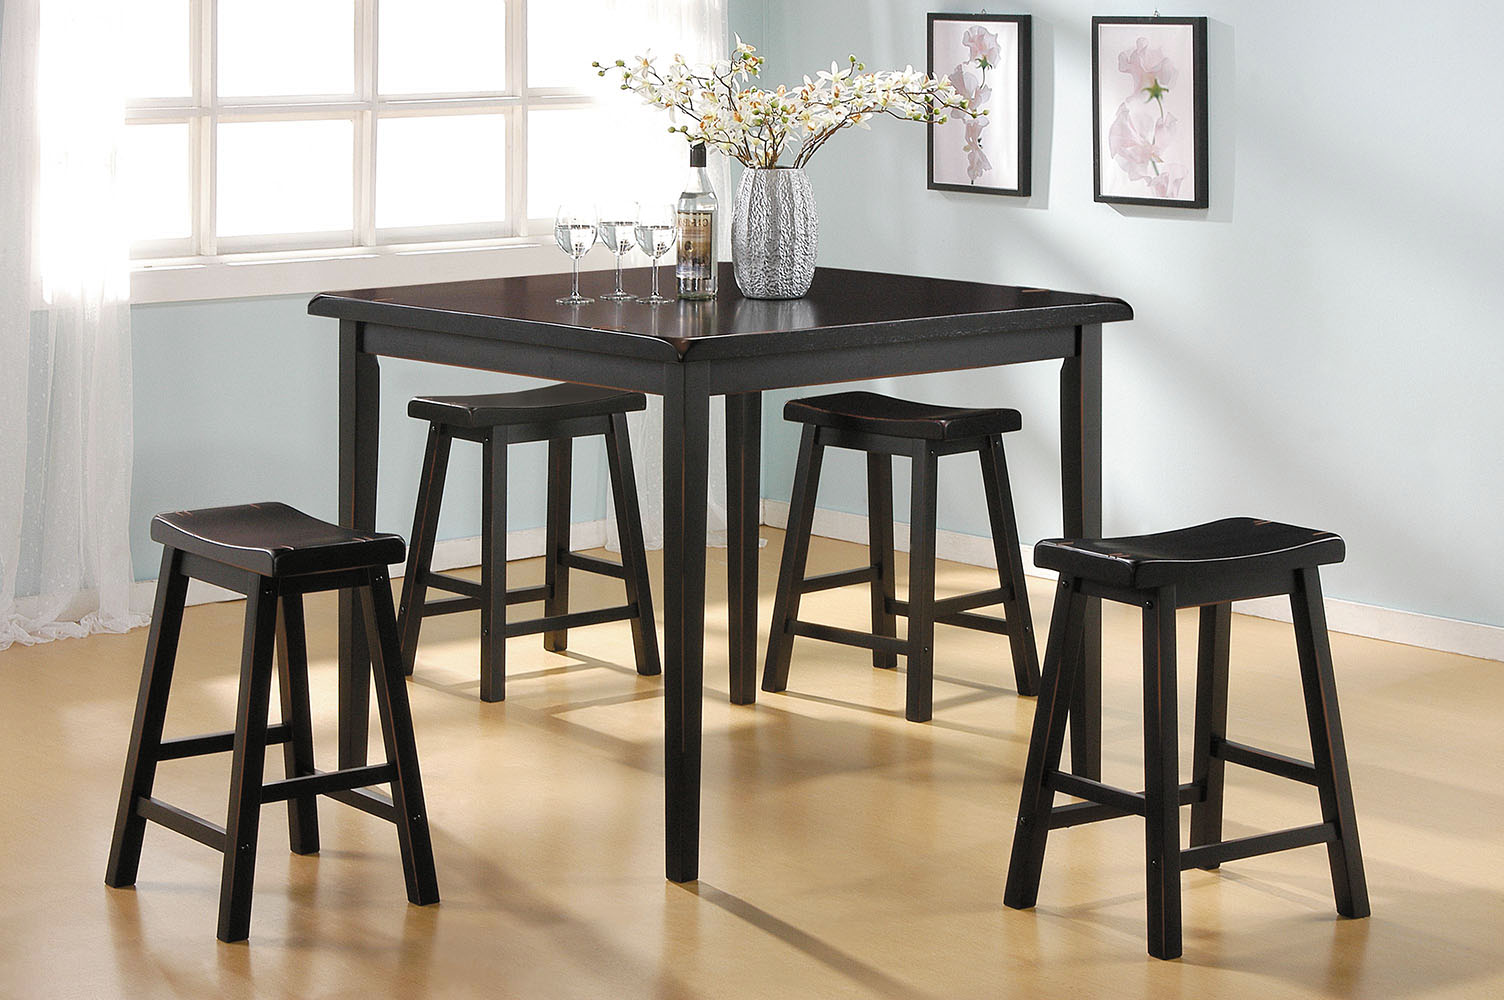 Gaucho 5Pc Pack Counter Height Set, Black